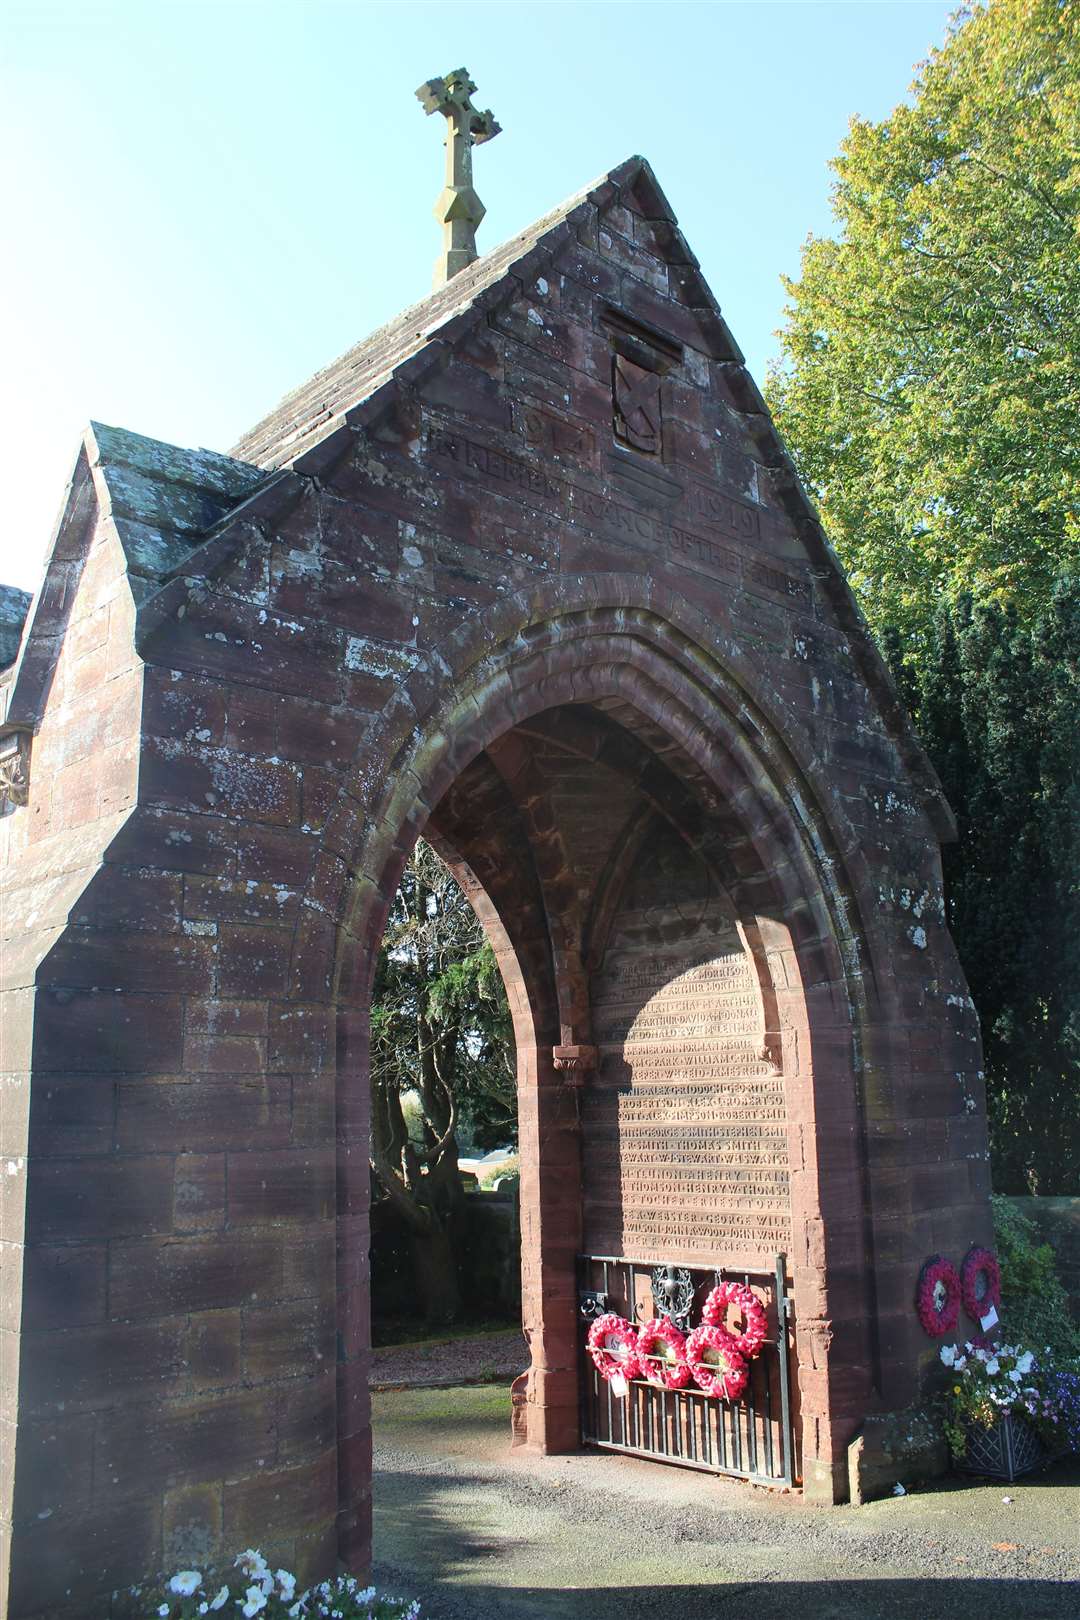 Work will commence on the archway after Remembrance Sunday.